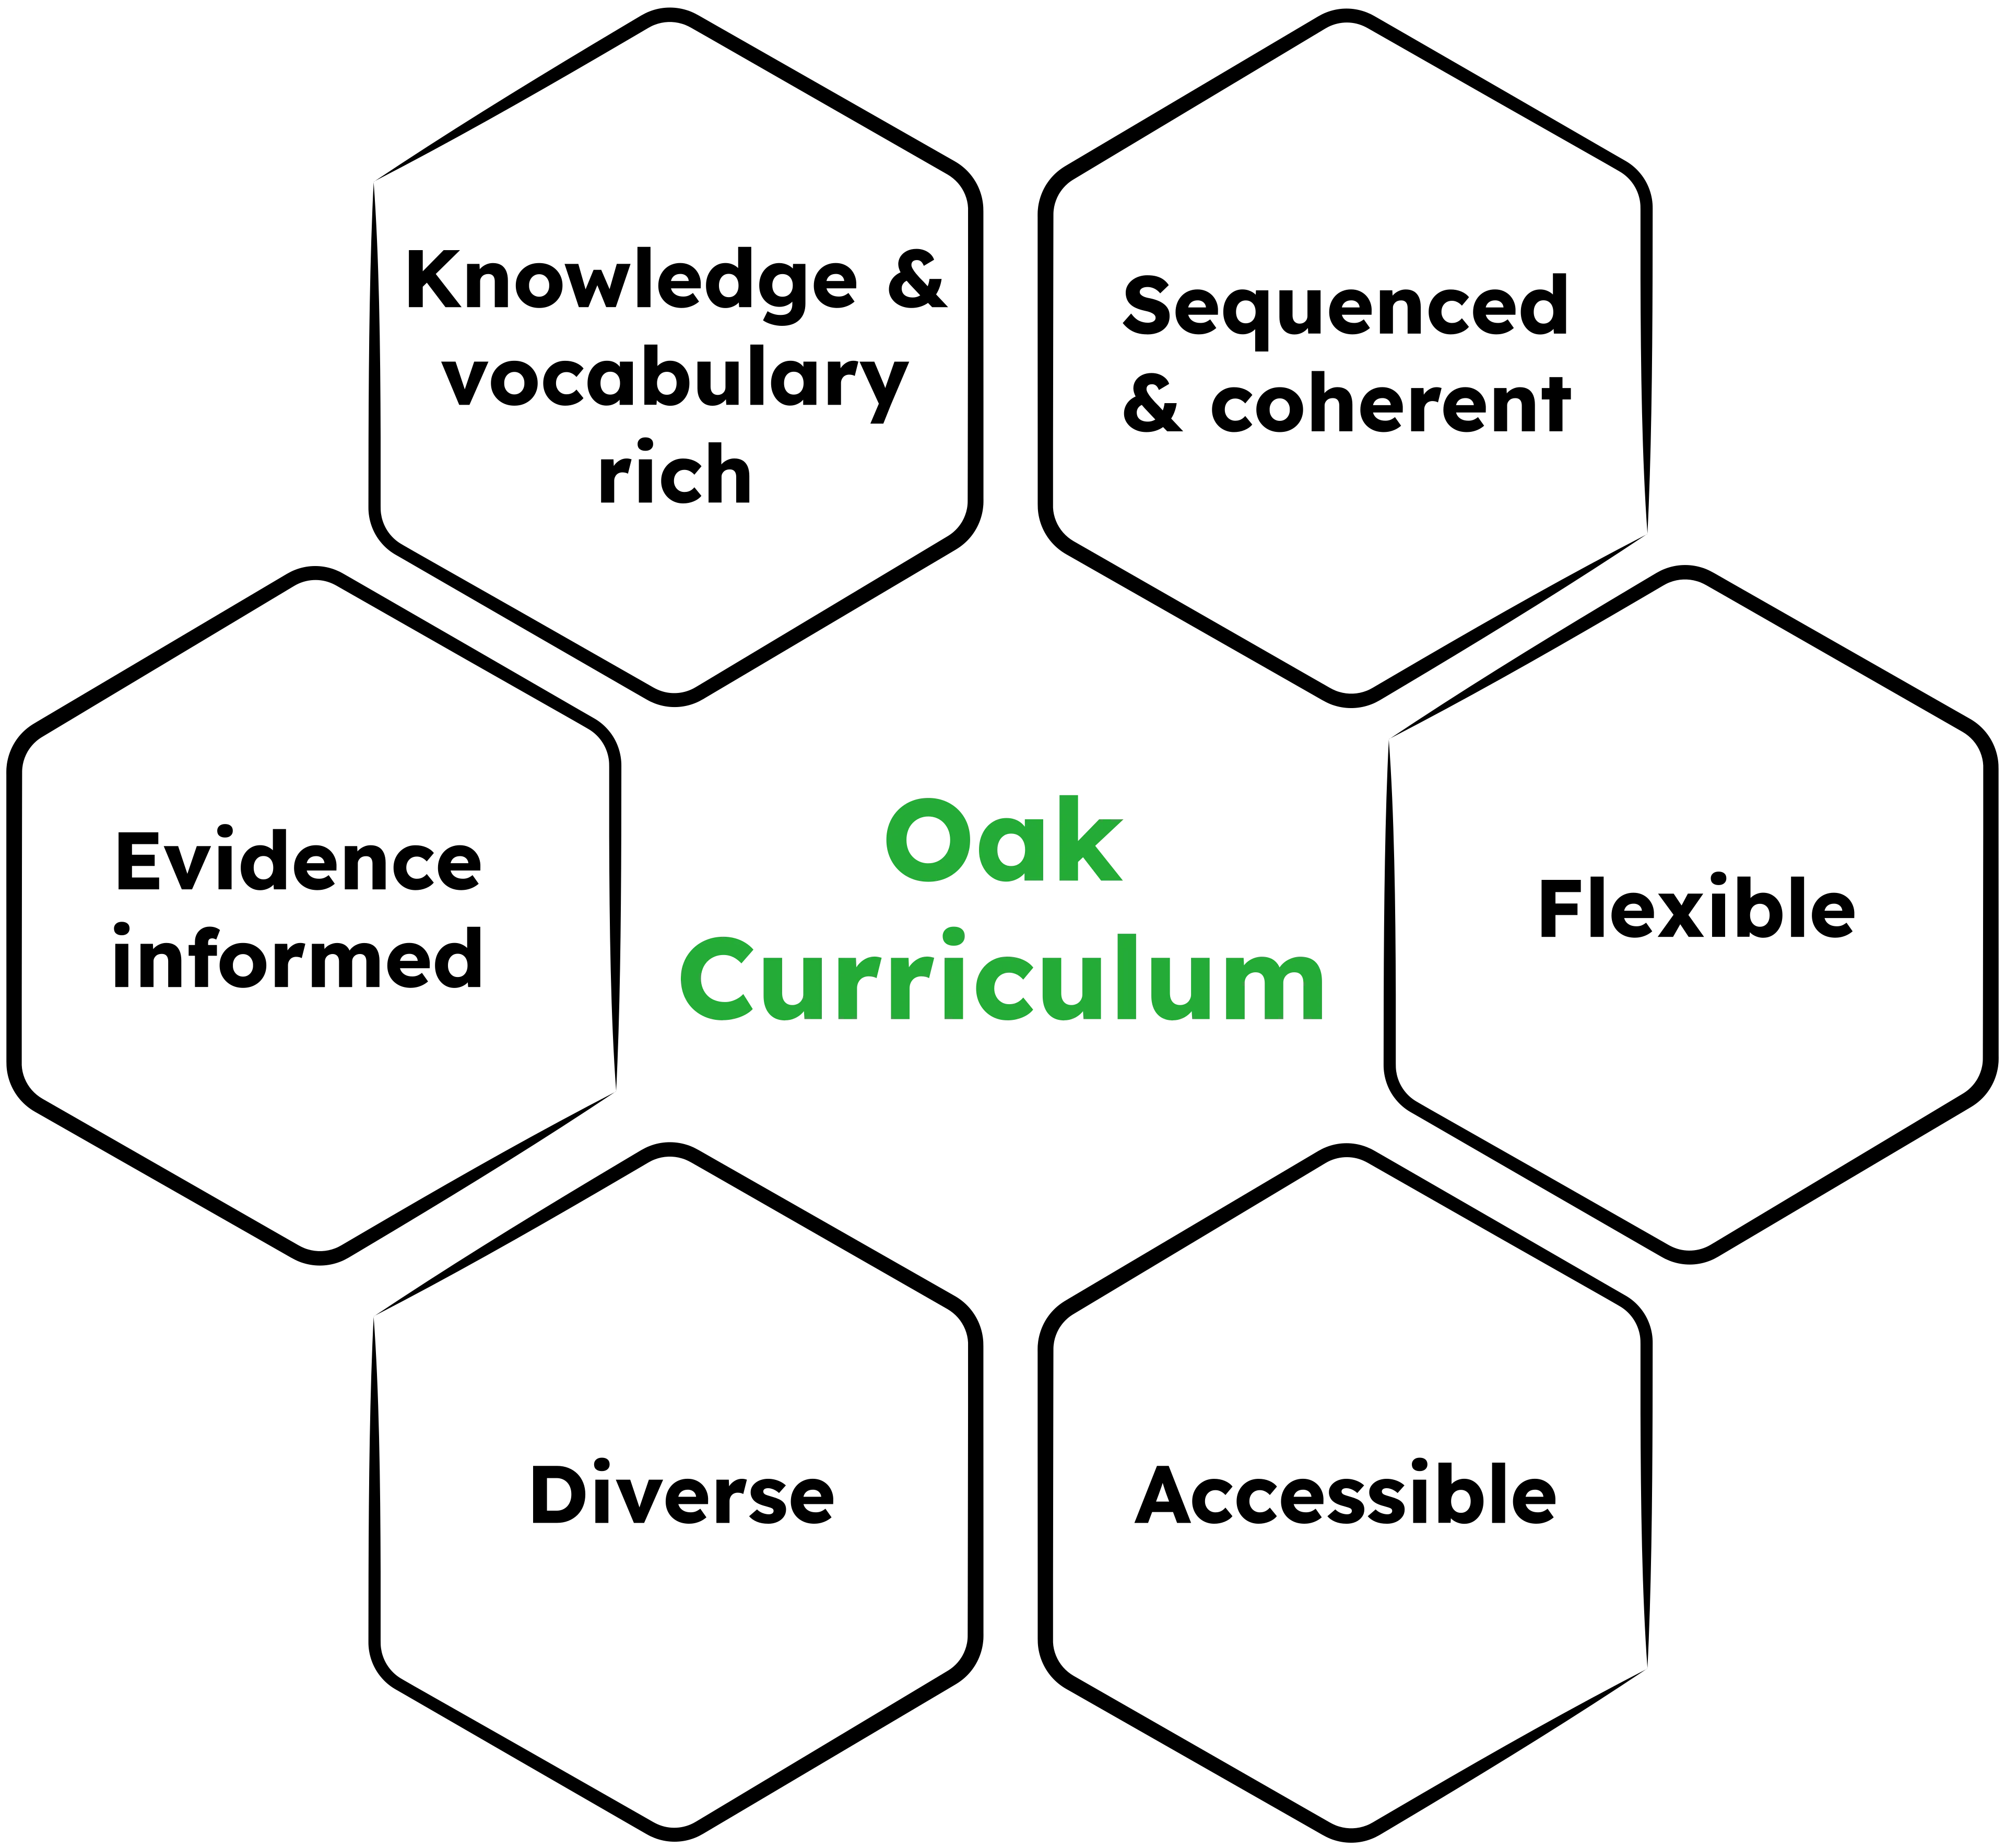 Our guiding curriculum principles summarise the important features of great curricula. They are: flexible, accessible, diverse, evidence informed, knowledge and vocabulary rich, sequenced and coherent